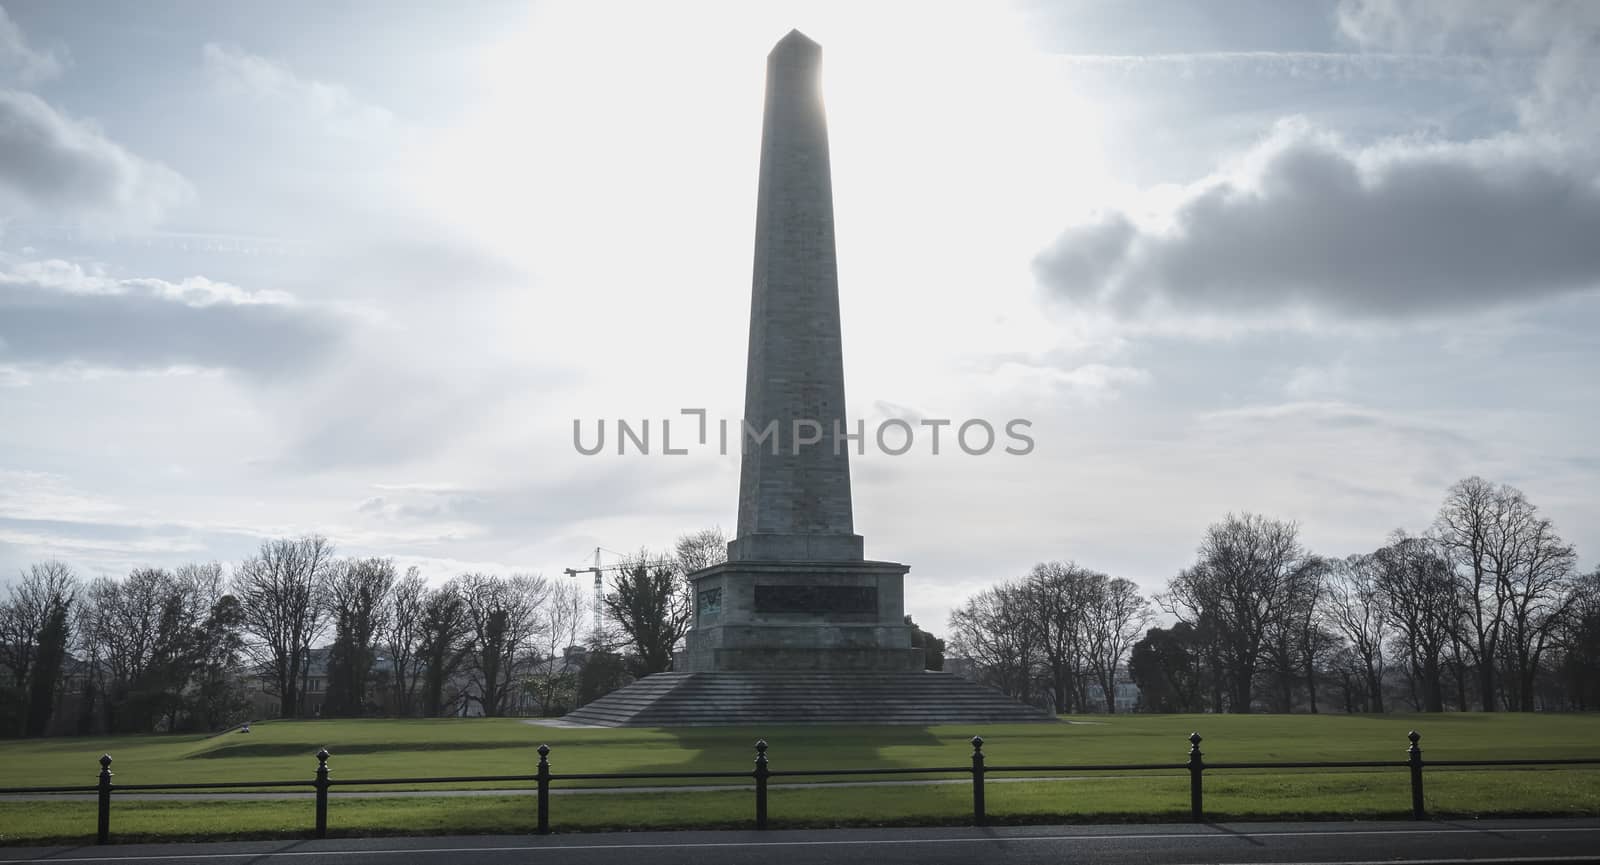 Architectural detail of the Wellington Testimonial obelisk in the Phoenix Park of Dublin, Ireland on a winter day